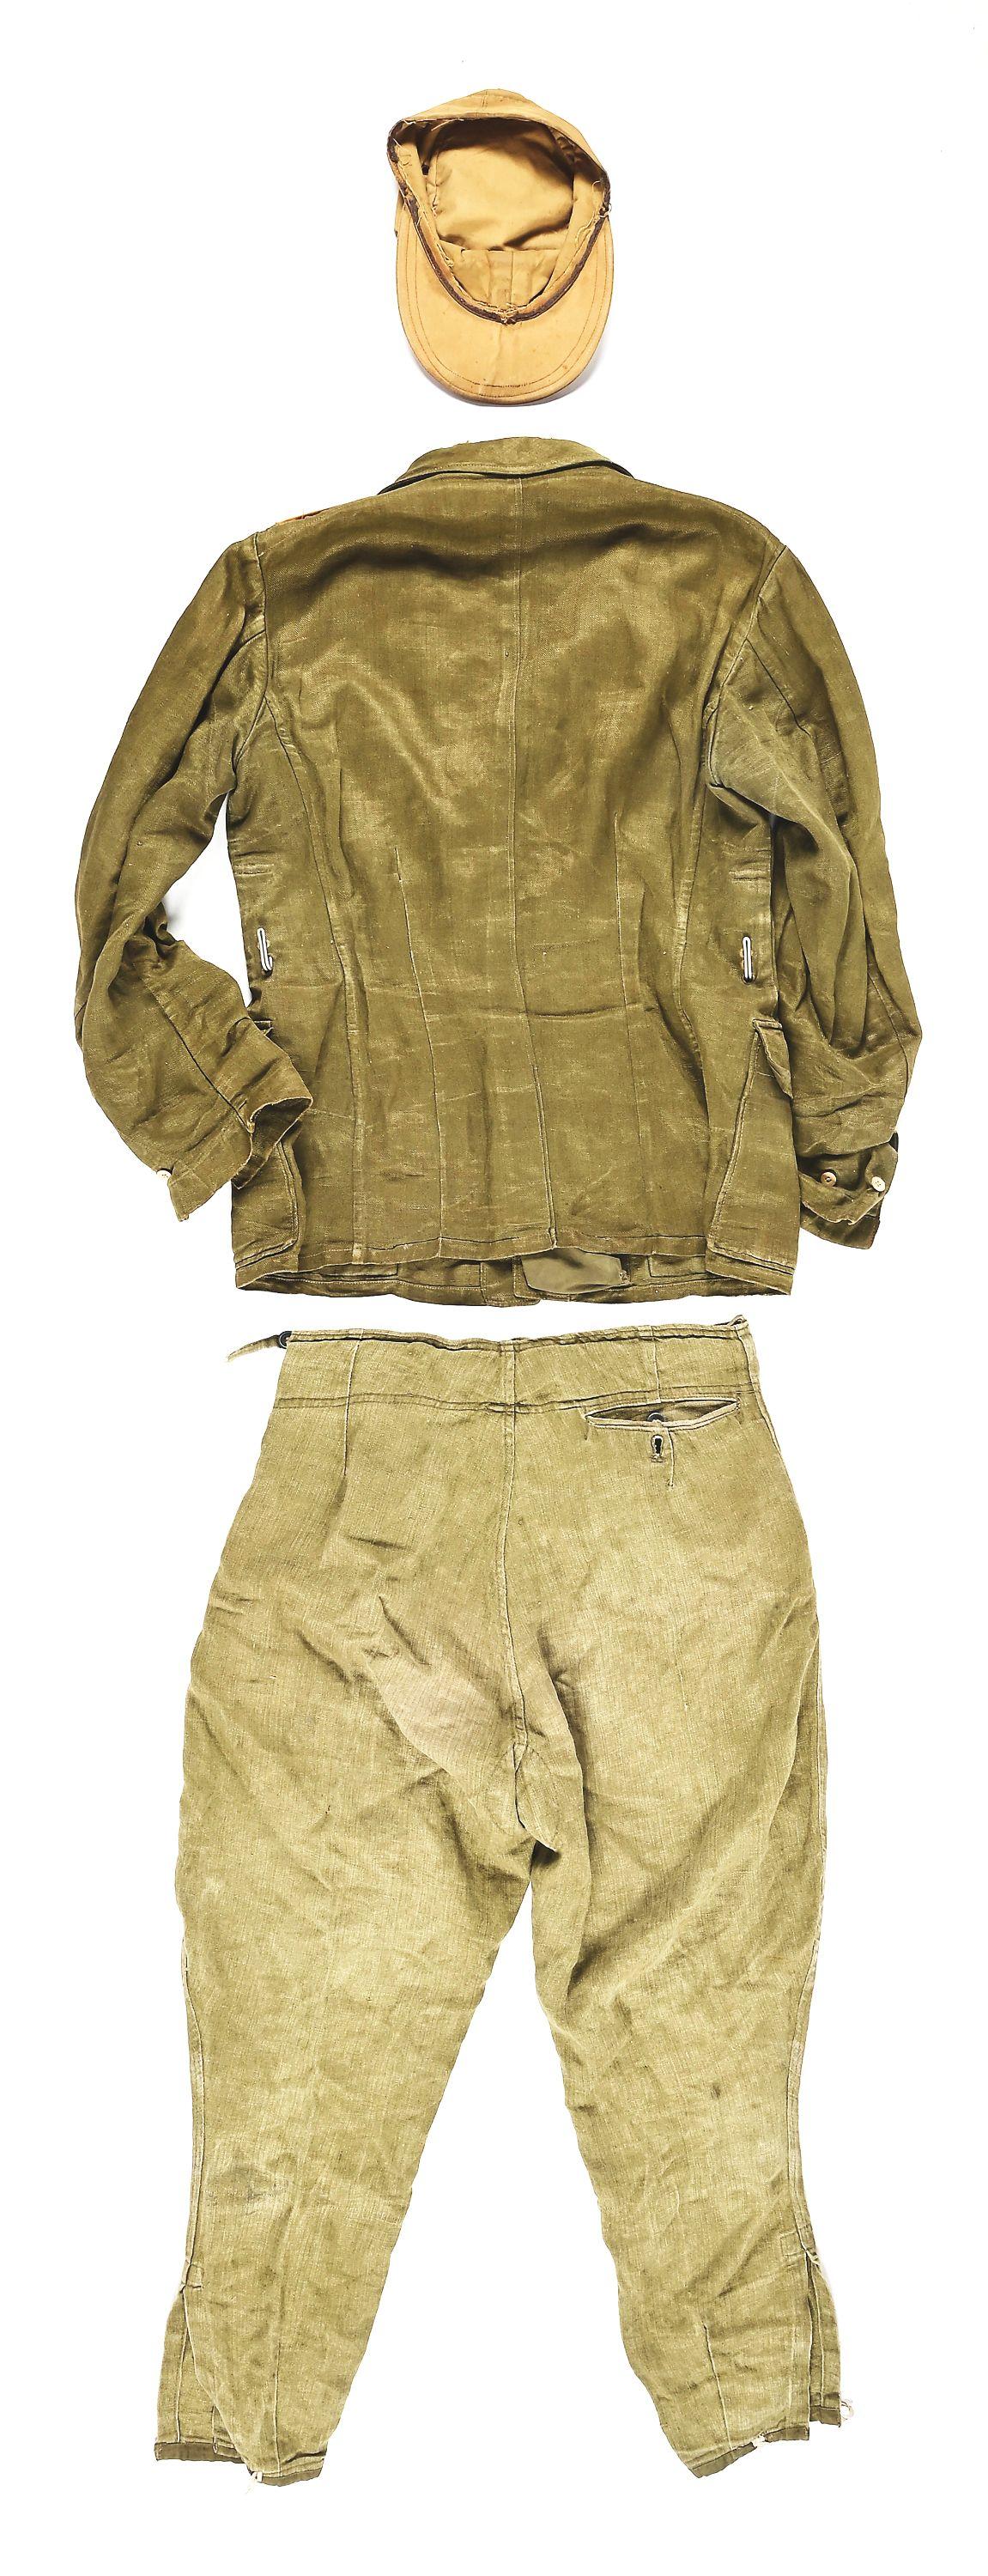 GERMAN WWII LUFTWAFFE TROPICAL UNIFORM WITH TUNIC, TROUSERS, HAT, AND BELT.